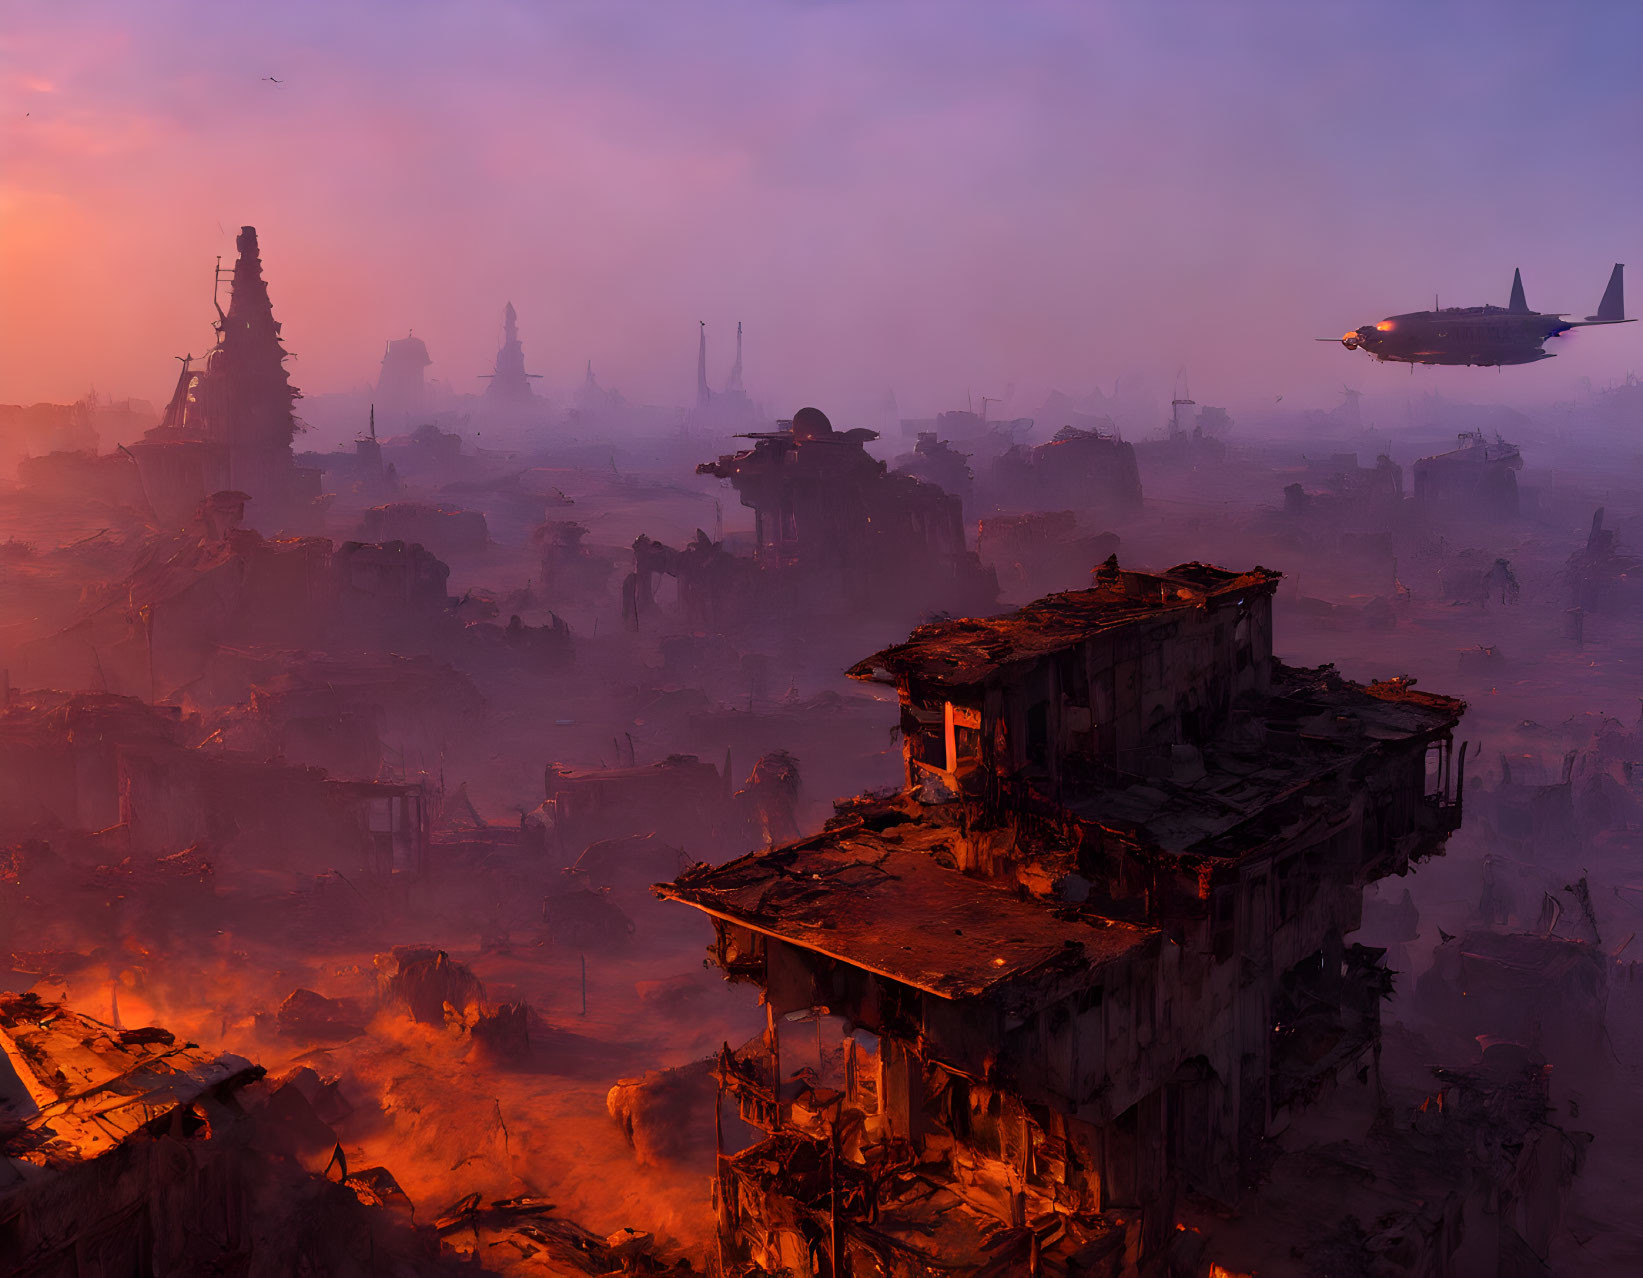 Dystopian landscape at dusk with derelict buildings and airships in orange haze